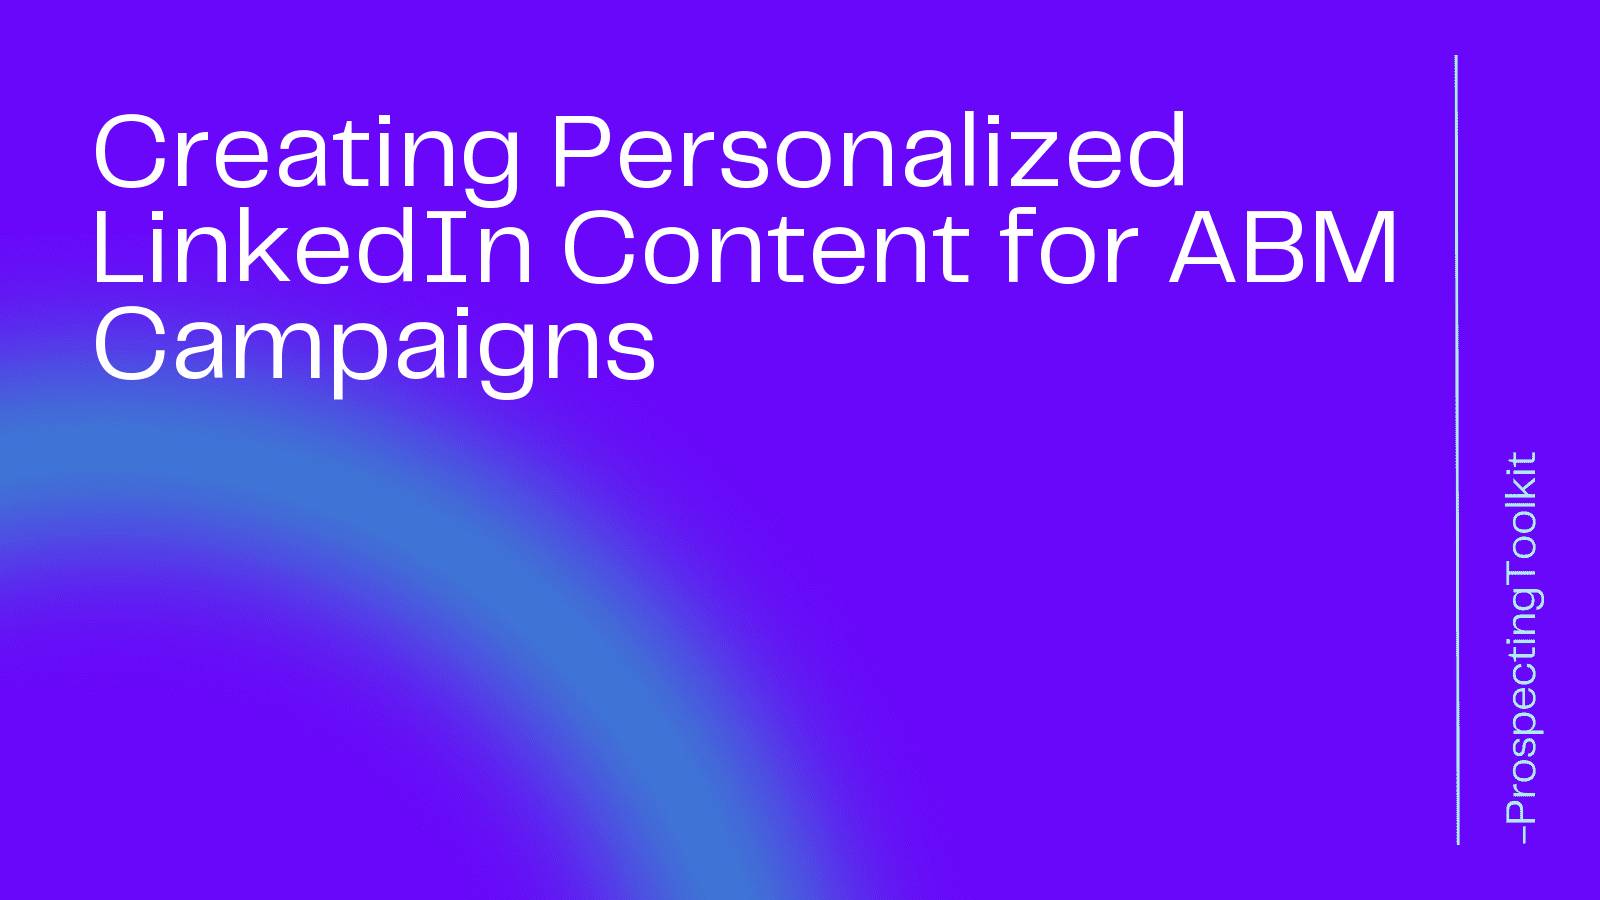 Creating Personalized LinkedIn Content for ABM Campaigns